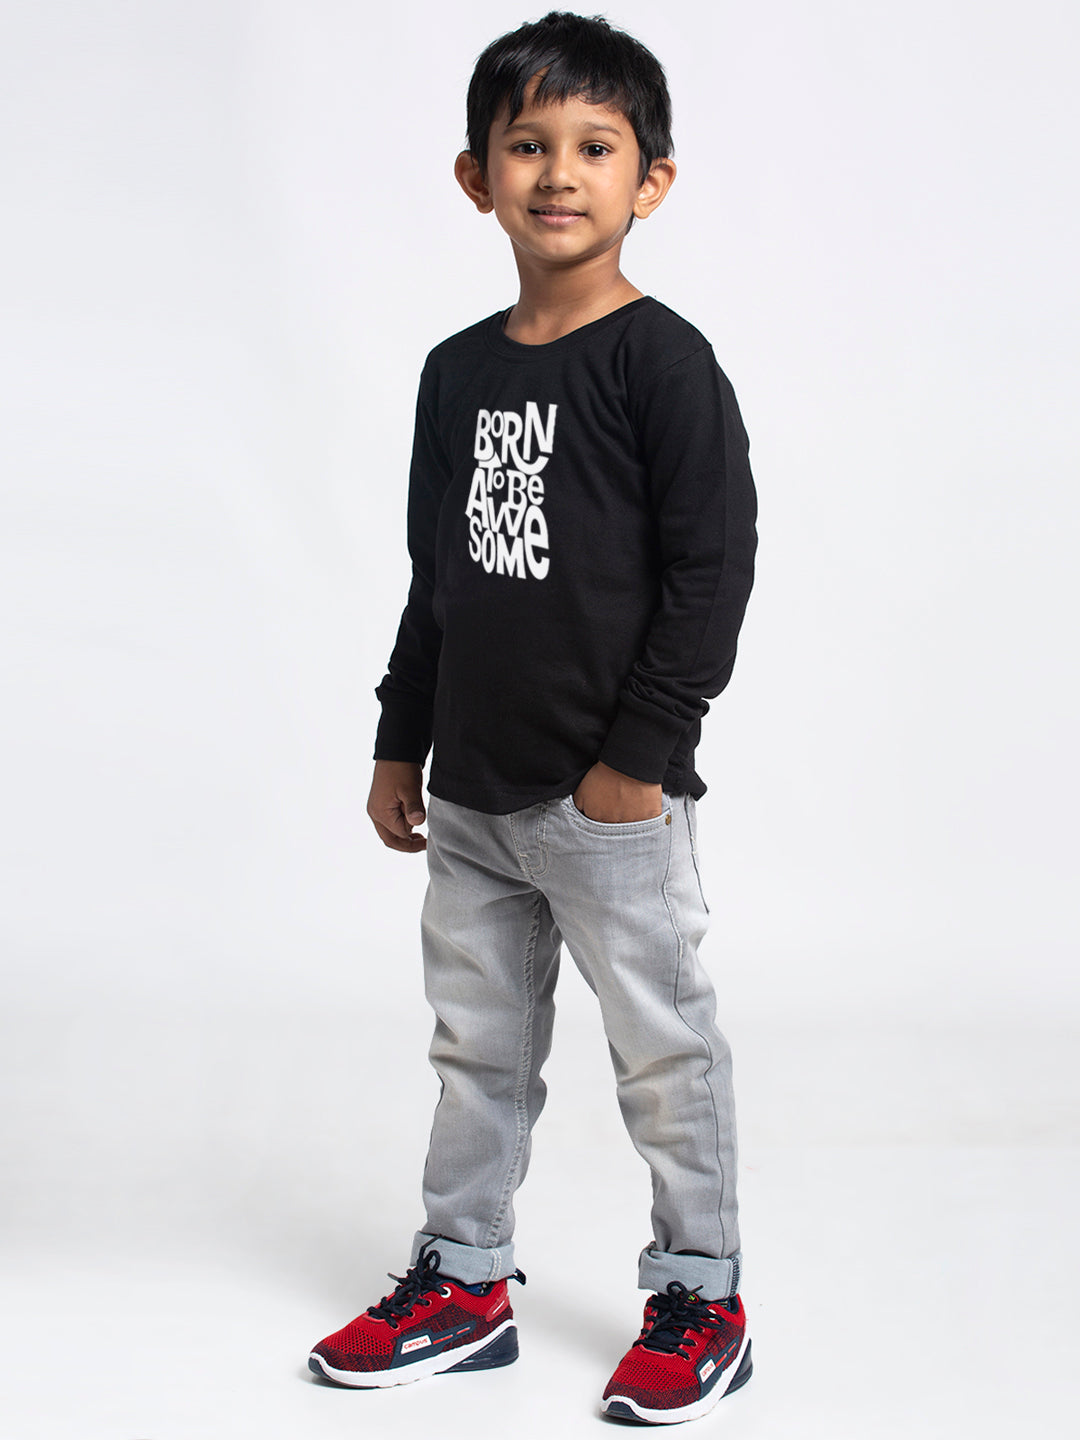 Kids Born To Be Awesome printed full sleeves t-shirt - Friskers